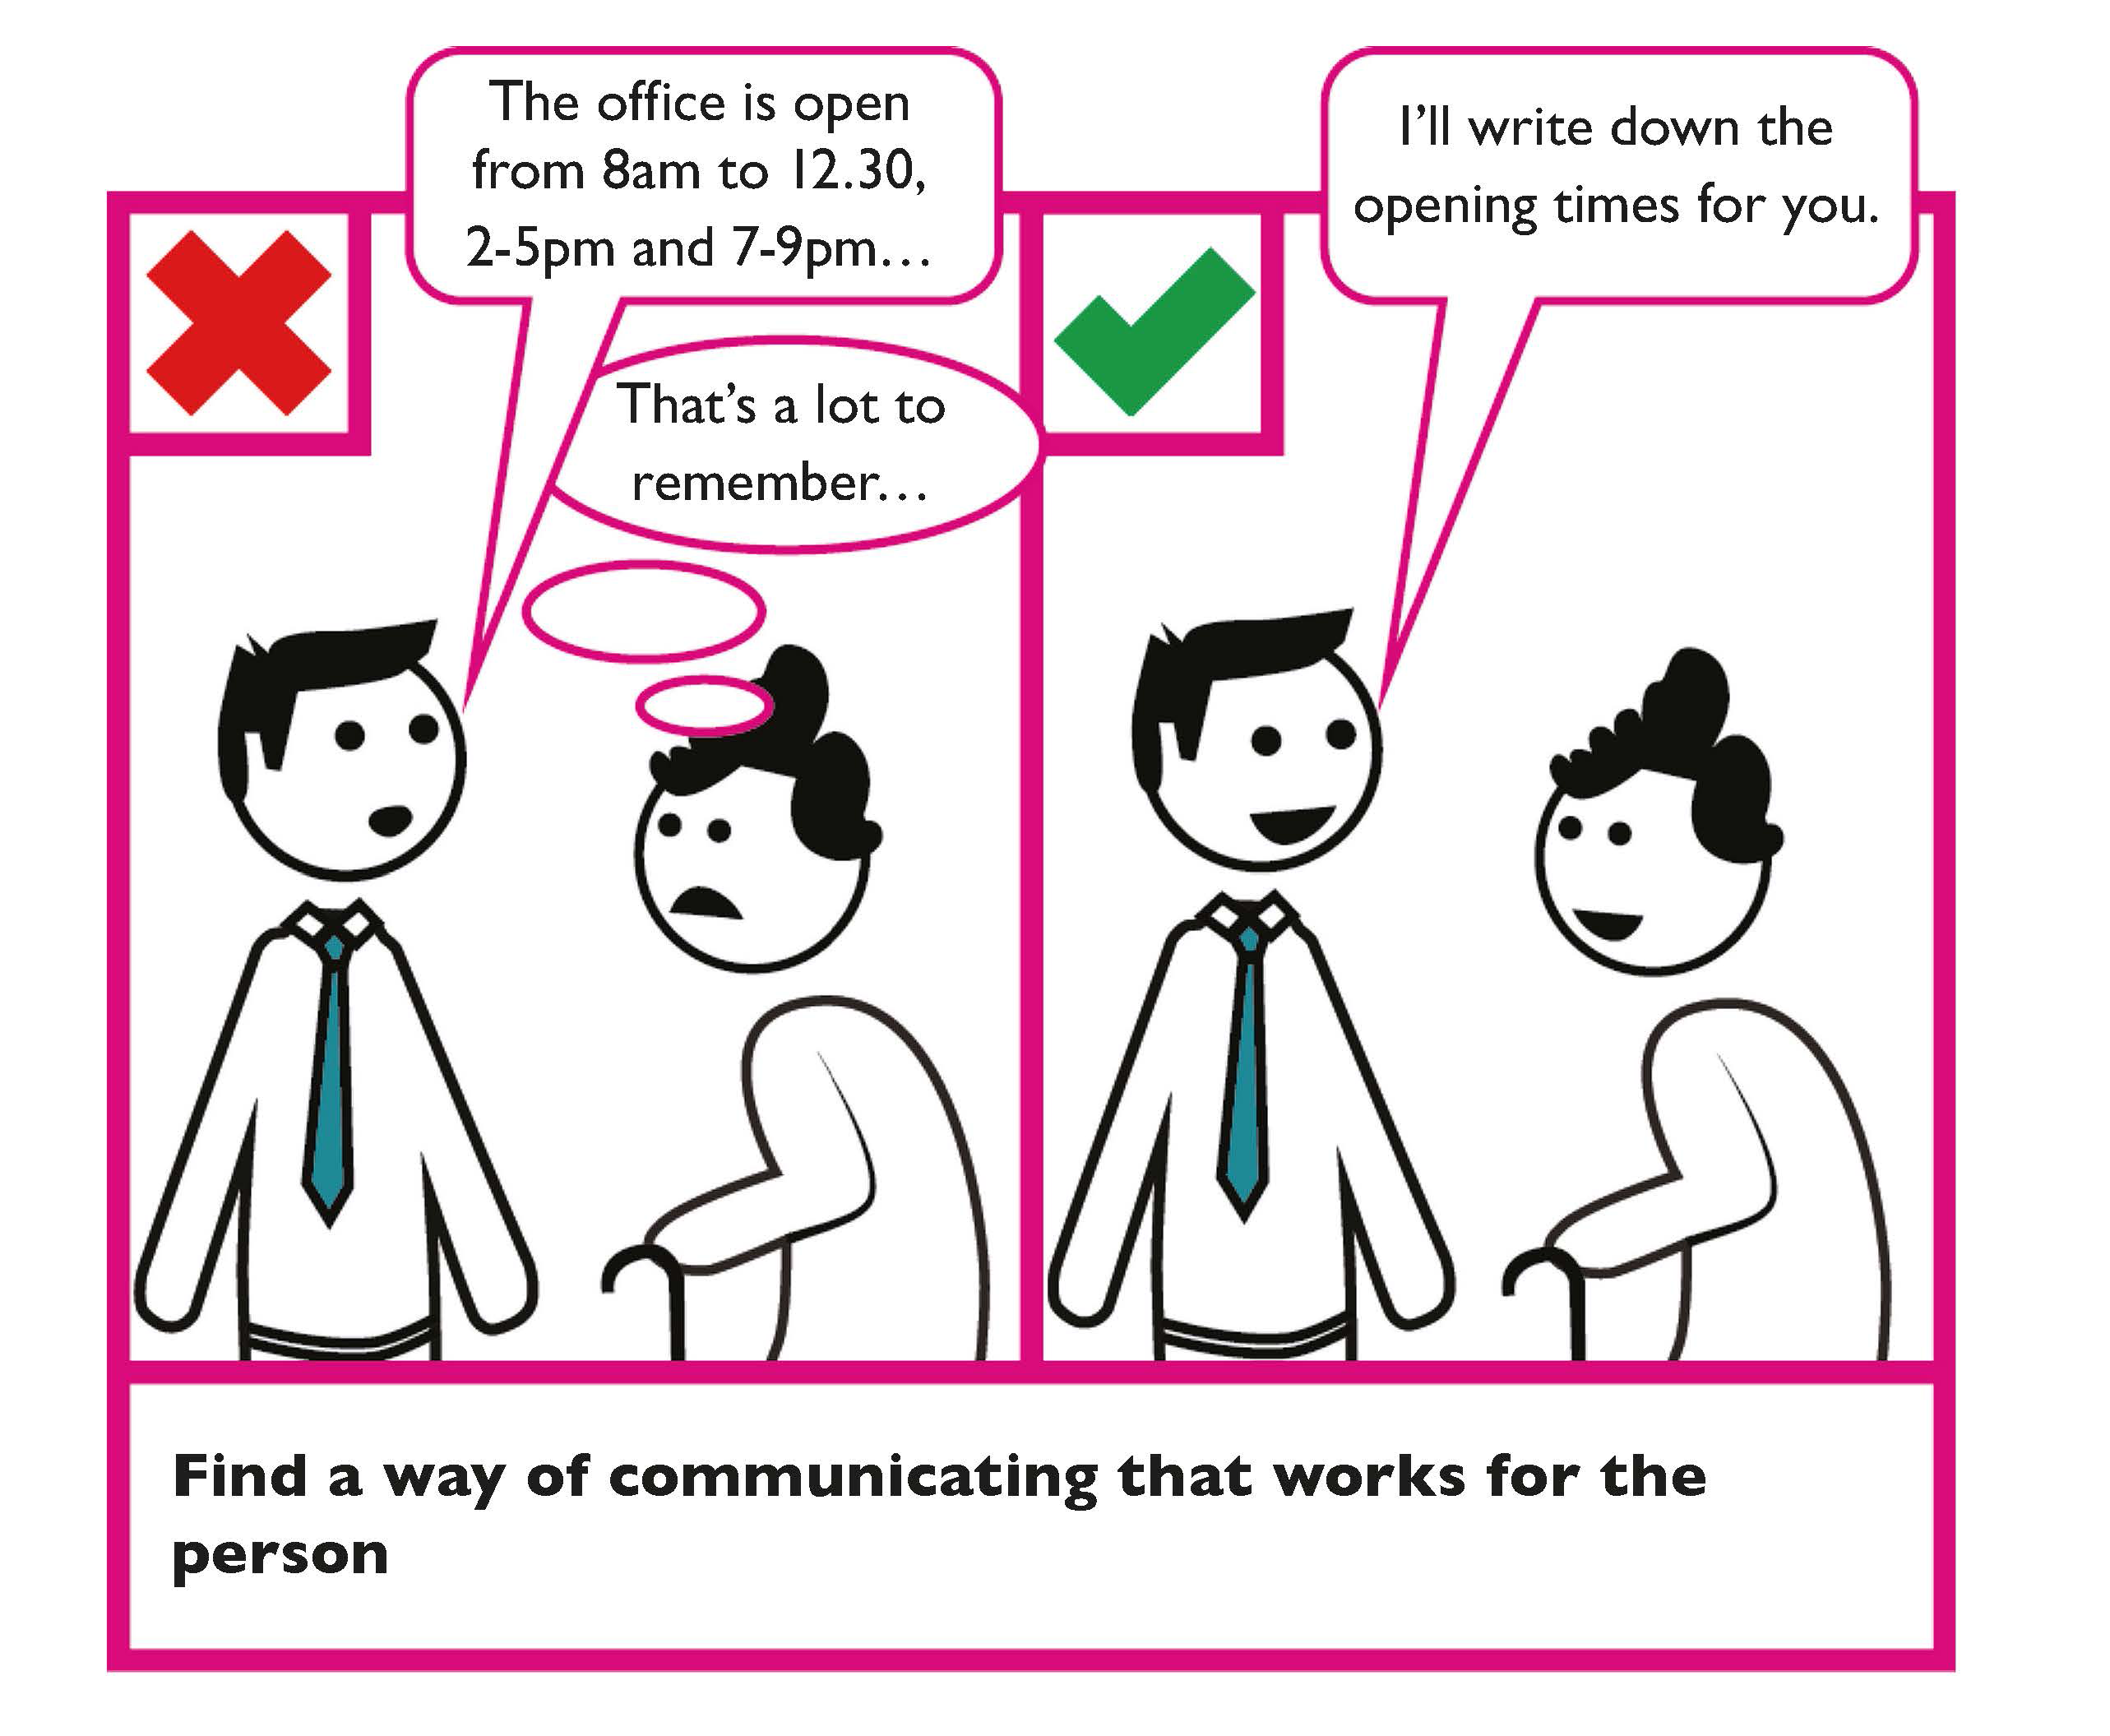 Example of good verbal communication. Find a way of communicating that works for the person. This might mean writing down information for them.